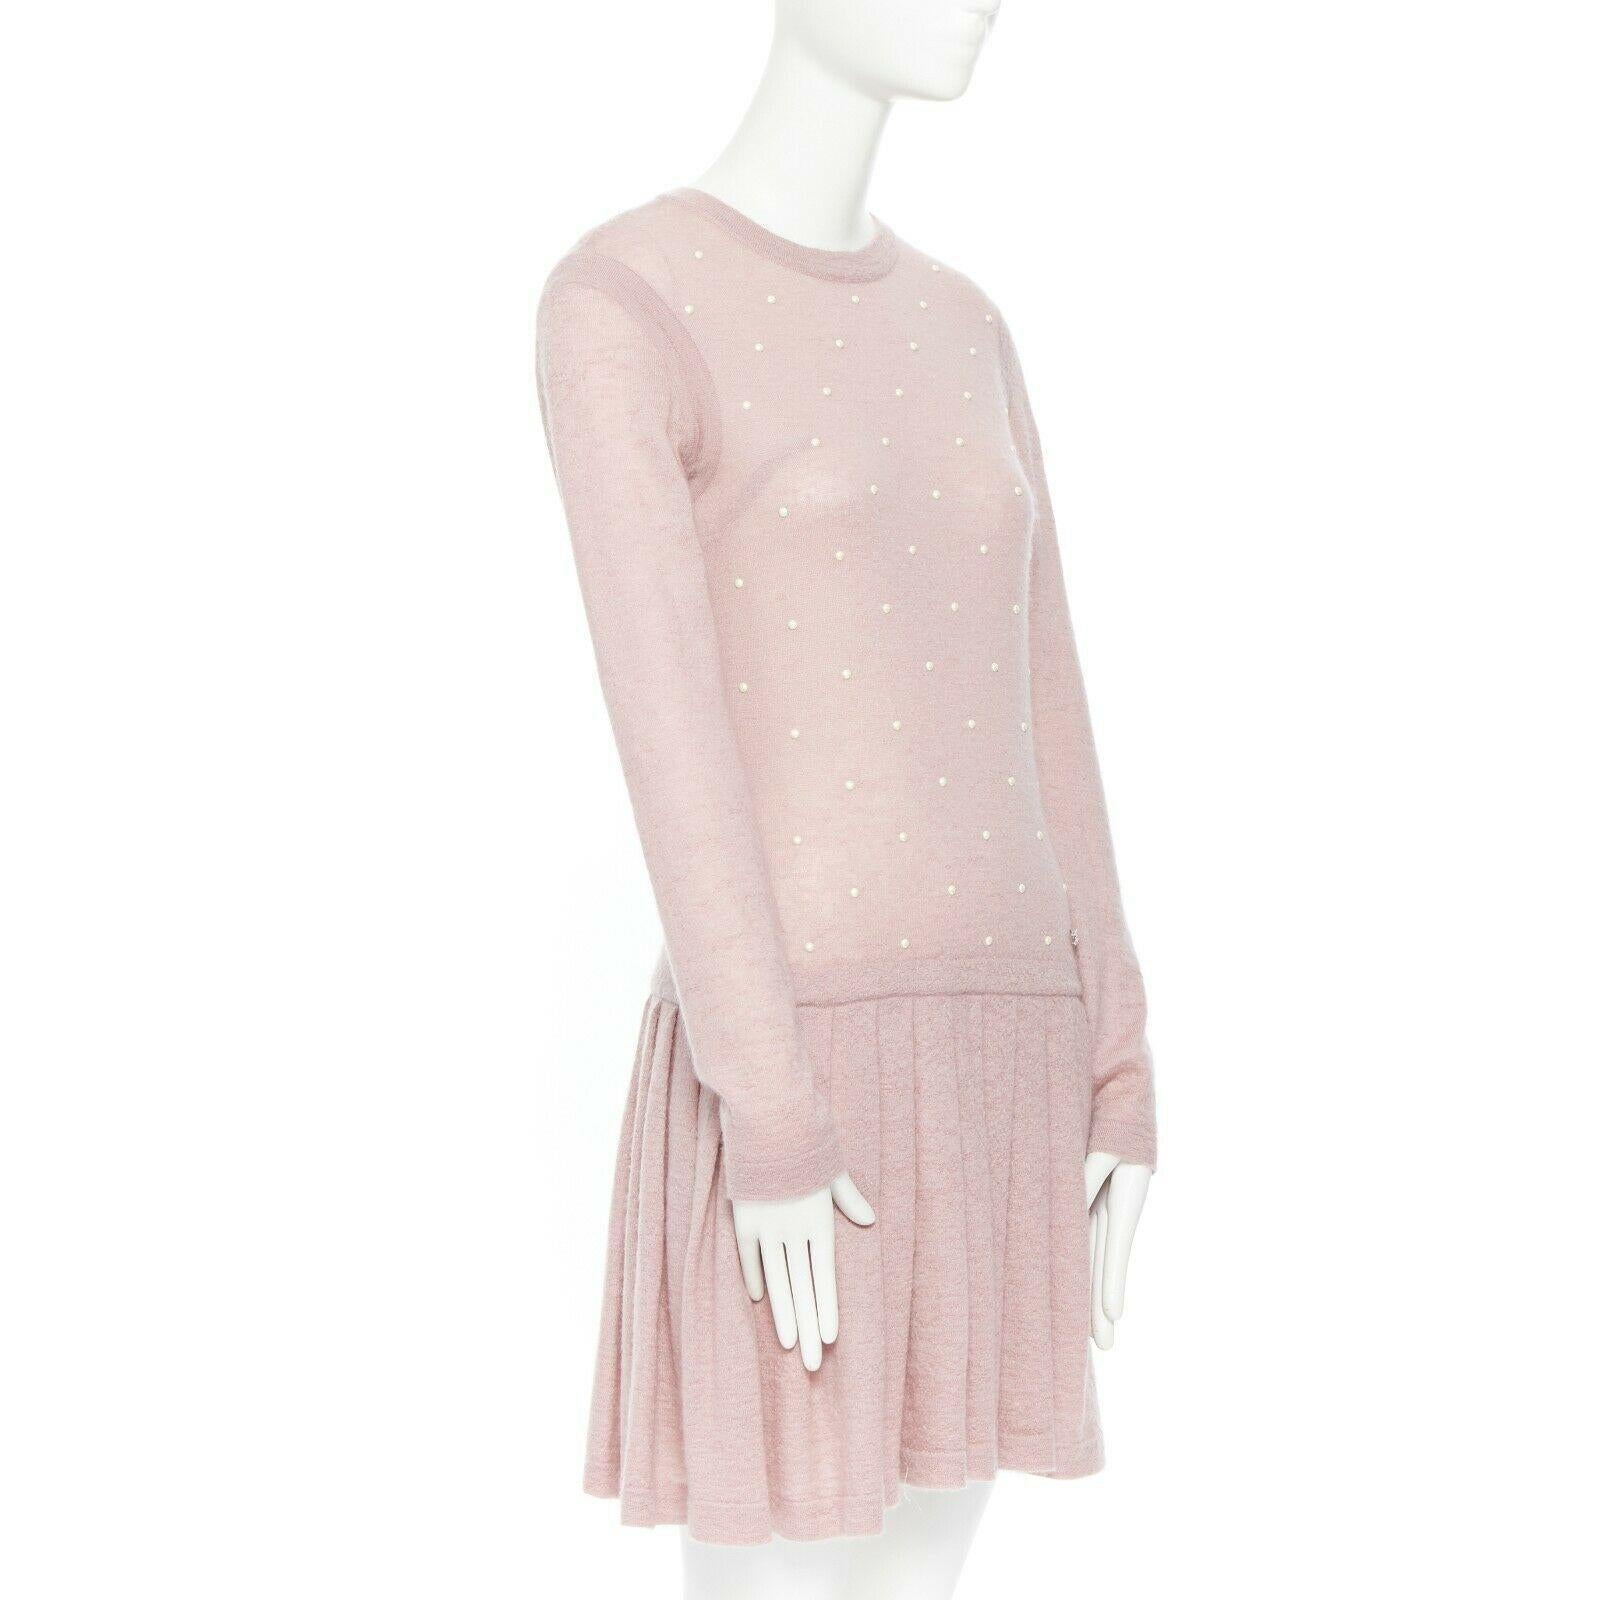 Women's CHANEL pink mohair cashmere pearl embellished skater knitted dress IT40 S